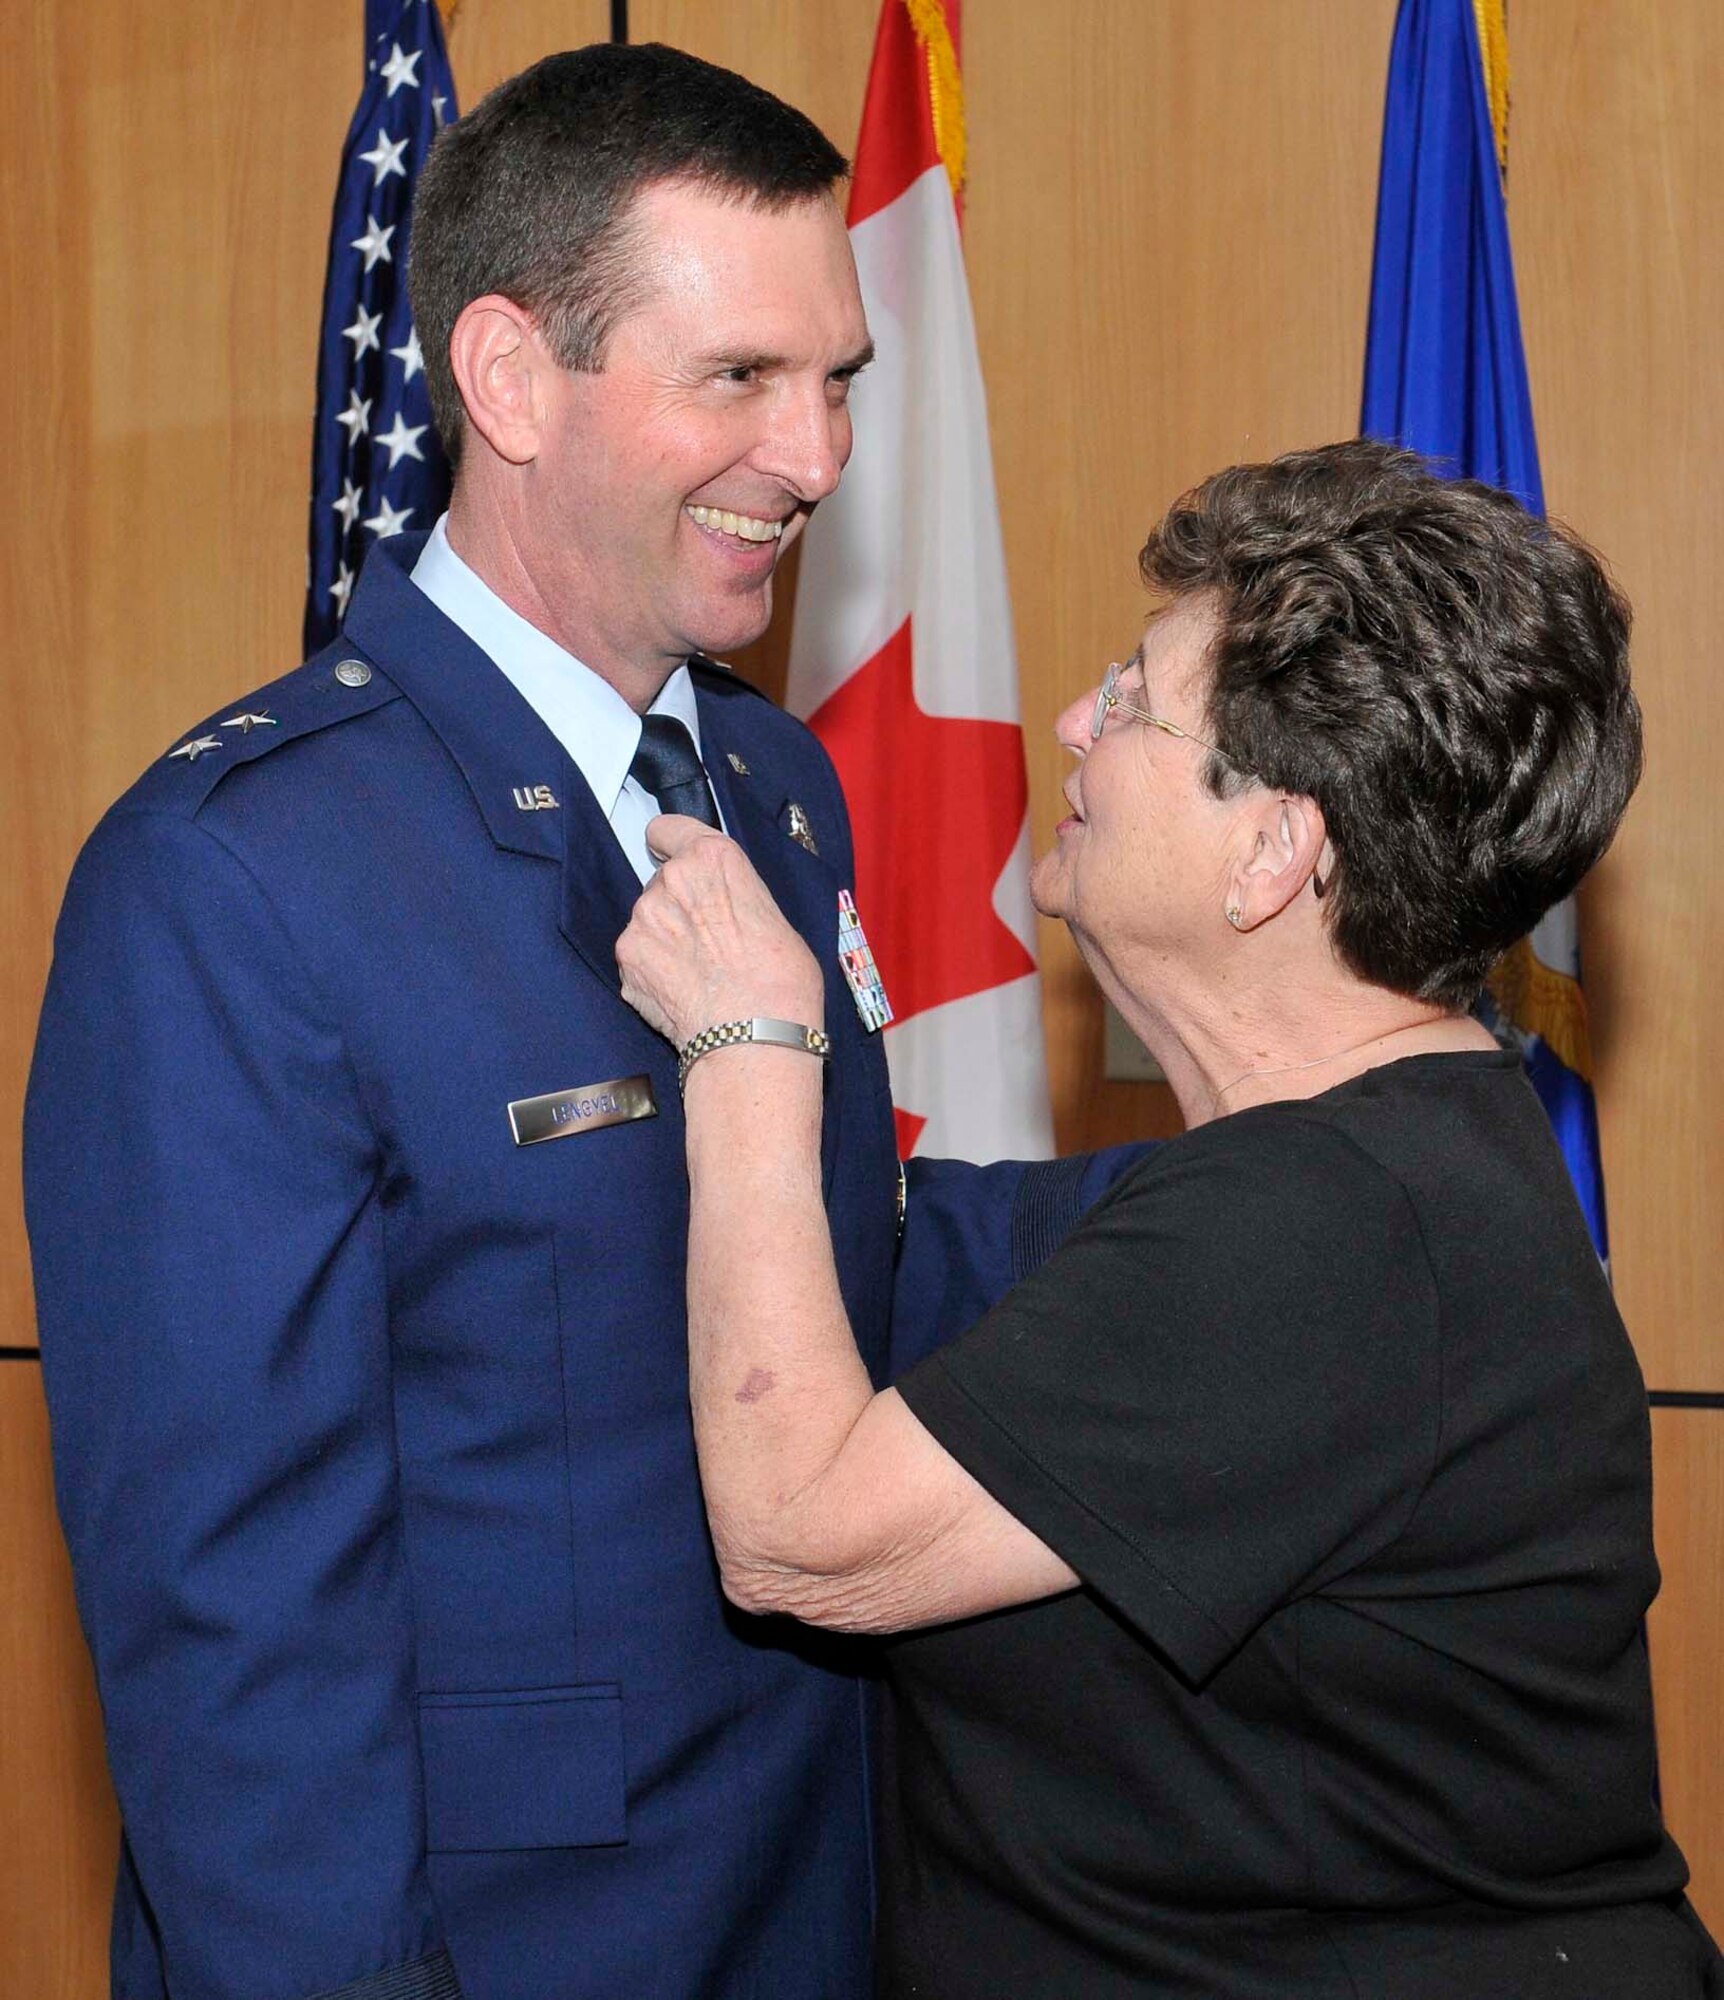 Maj. Gen. Joseph Lengyel shares a laugh with his mother Margaret Lengyel as she straightens his tie before his promotion ceremony at Tyndall Air Force Base, Fla., April 1. General Lengyel is the 1st Air Force (Air Forces Northern) vice commander. (U.S. Air Force photo by Lisa Norman)